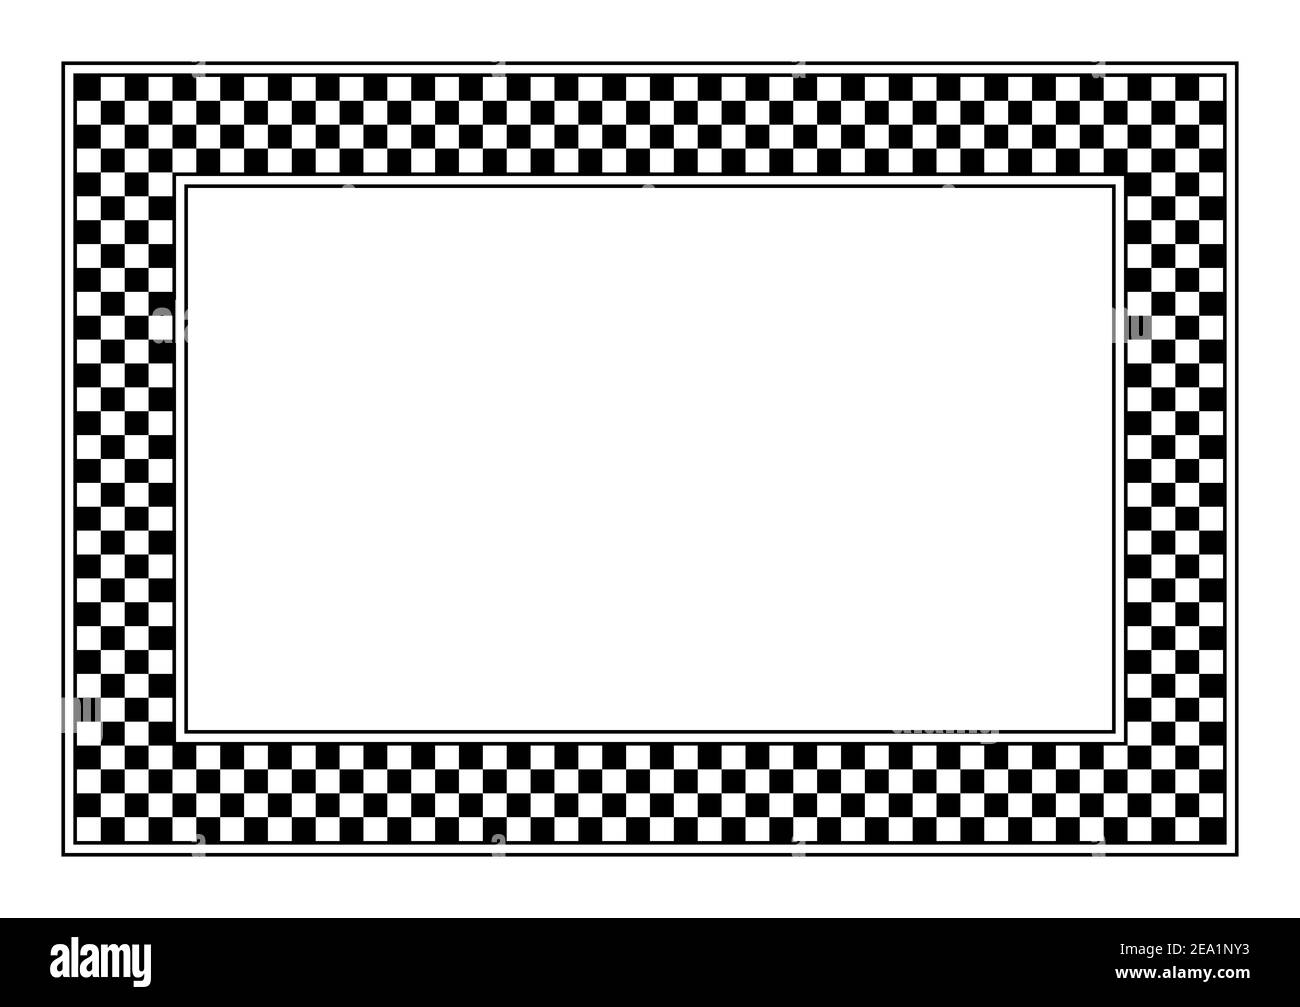 Checkerboard pattern, rectangle frame. A checkered pattern frame, made of a checkerboard diagram consisting of black and white alternating squares. Stock Photo